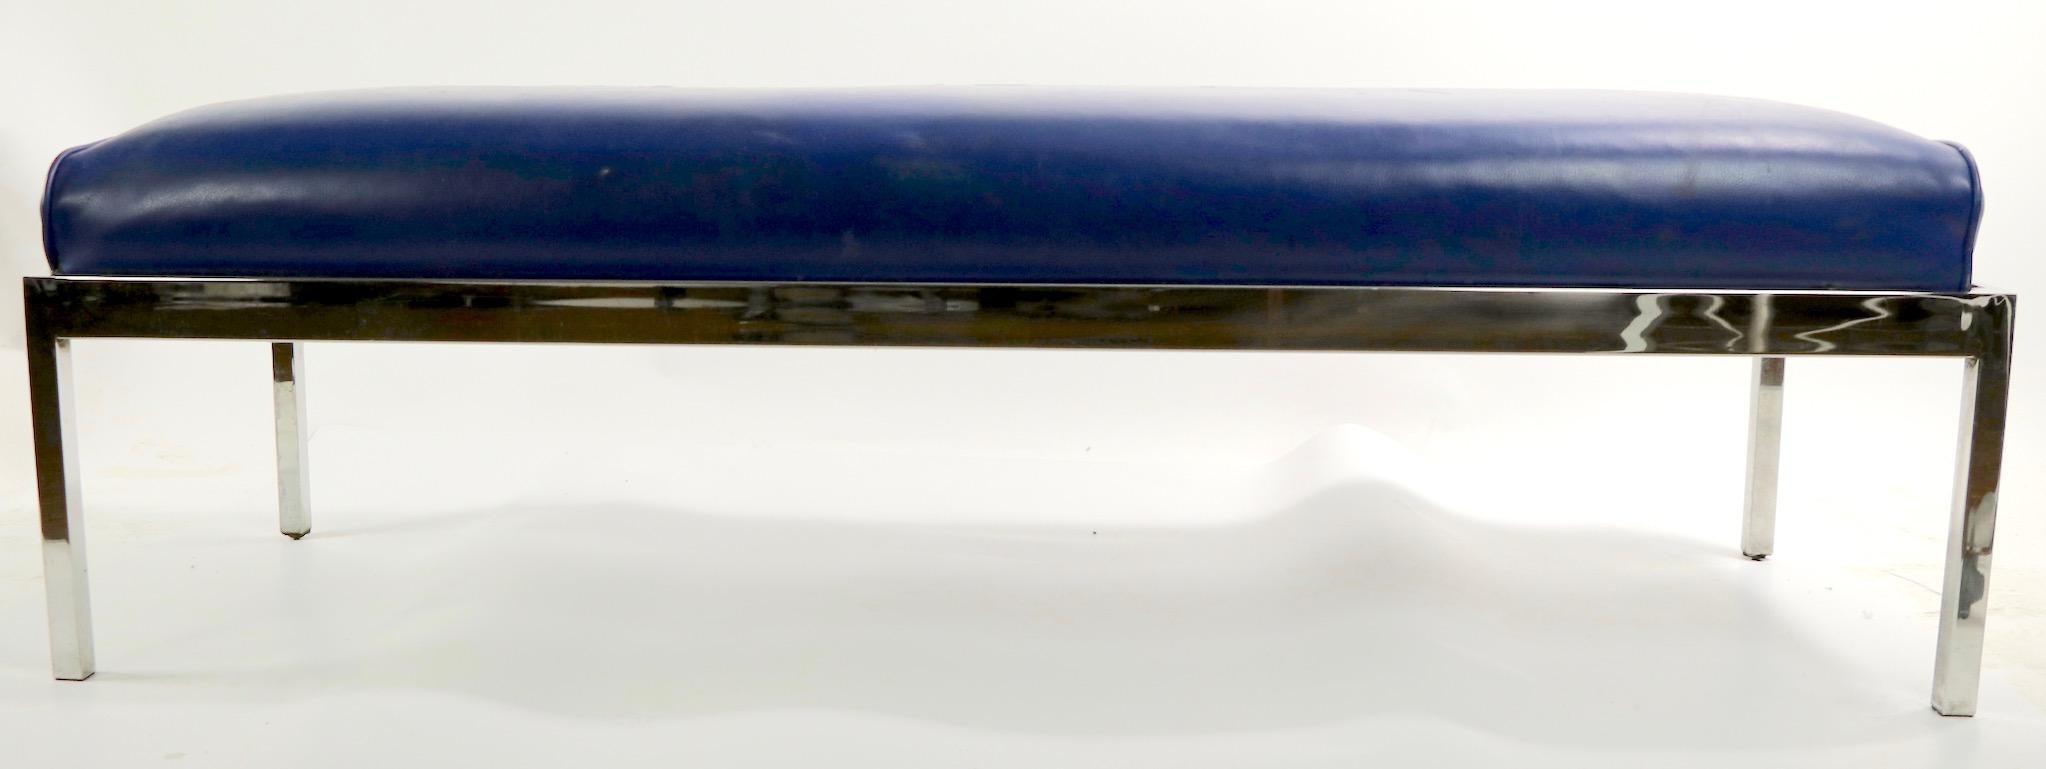 American Chrome Base Upholstered Bench after Milo Baughman